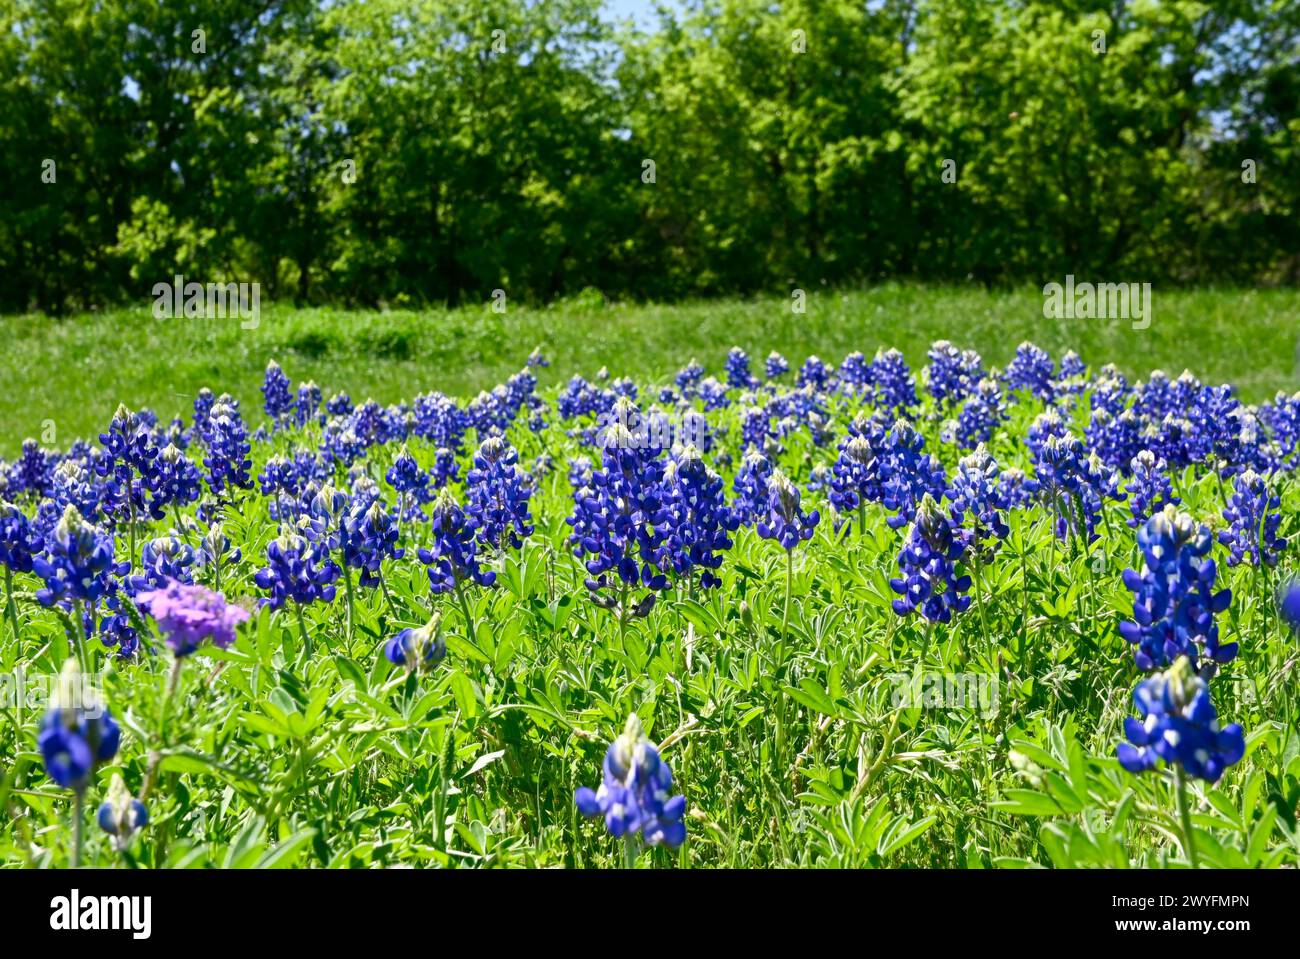 A field covered in green grass and a blanket of blooming Bluebonnet flowers on a sunny, Spring day in Texas. Stock Photo